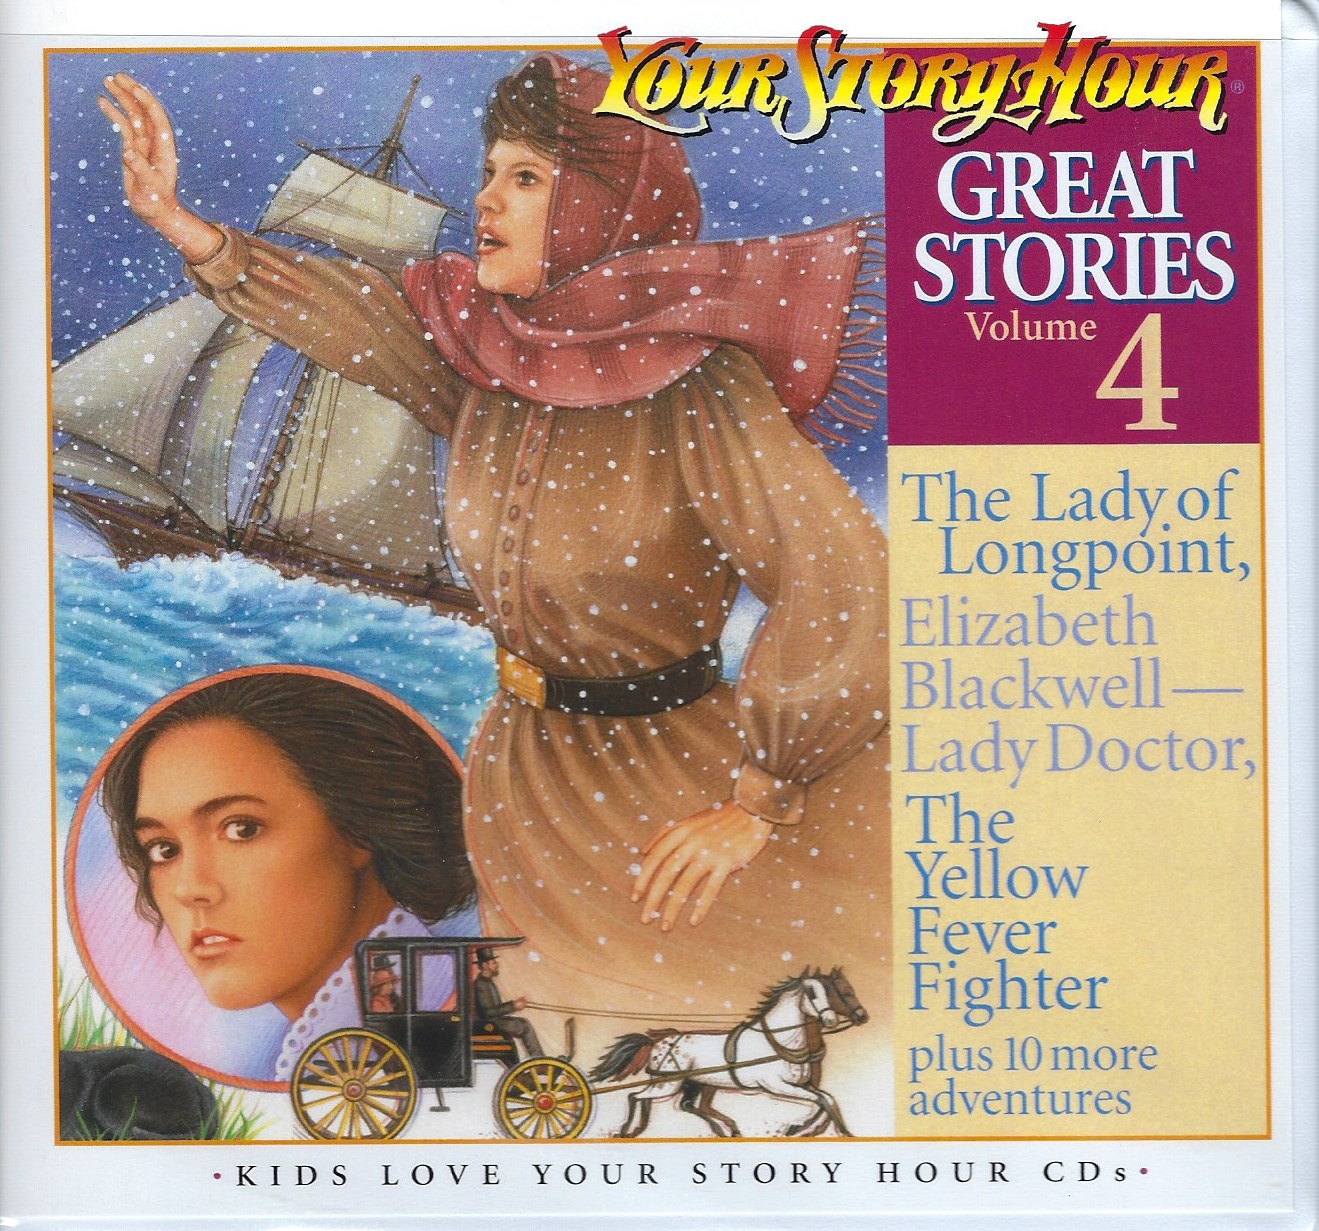 GREAT STORIES VOLUME 4 CD ALBUM Your Story Hour